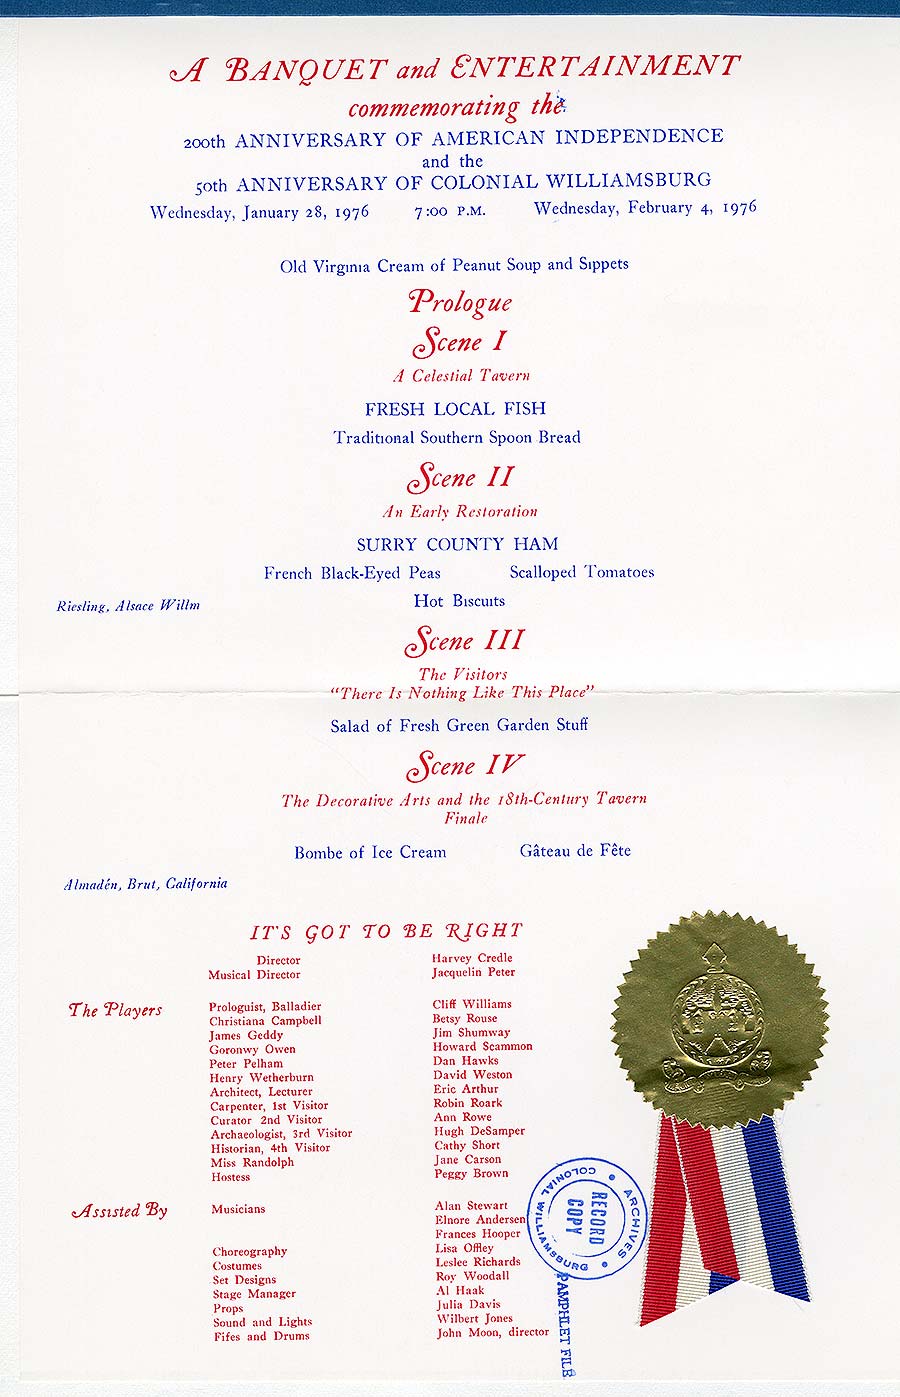 A Banquet and Entertainment commemorating the 200th Anniversary of American Independence and the 50th Anniversary of Colonial Williamsburg, 1976. 